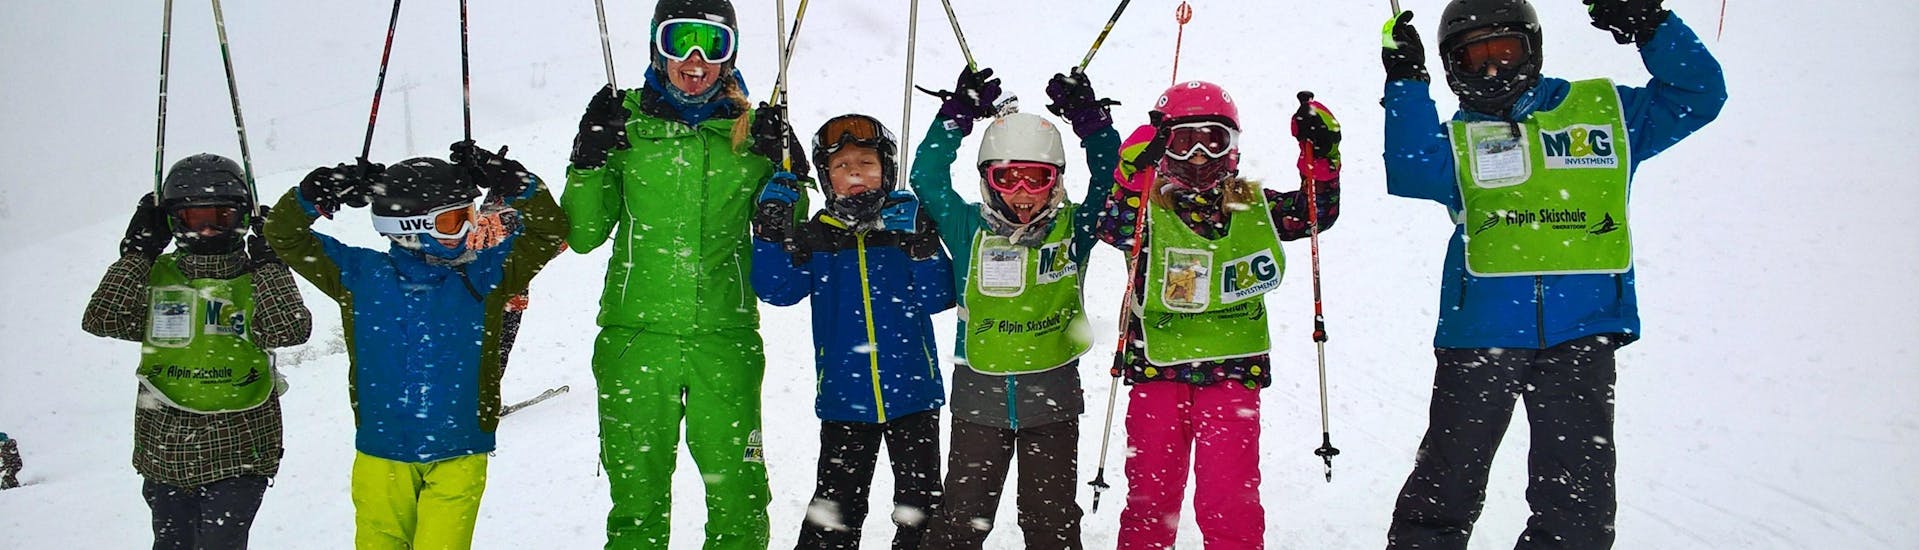 A group of happy children during the Kids Ski Lessons (9-16 years) - Advanced with their ski instructor from the ski school Alpin Skischule Oberstdorf.